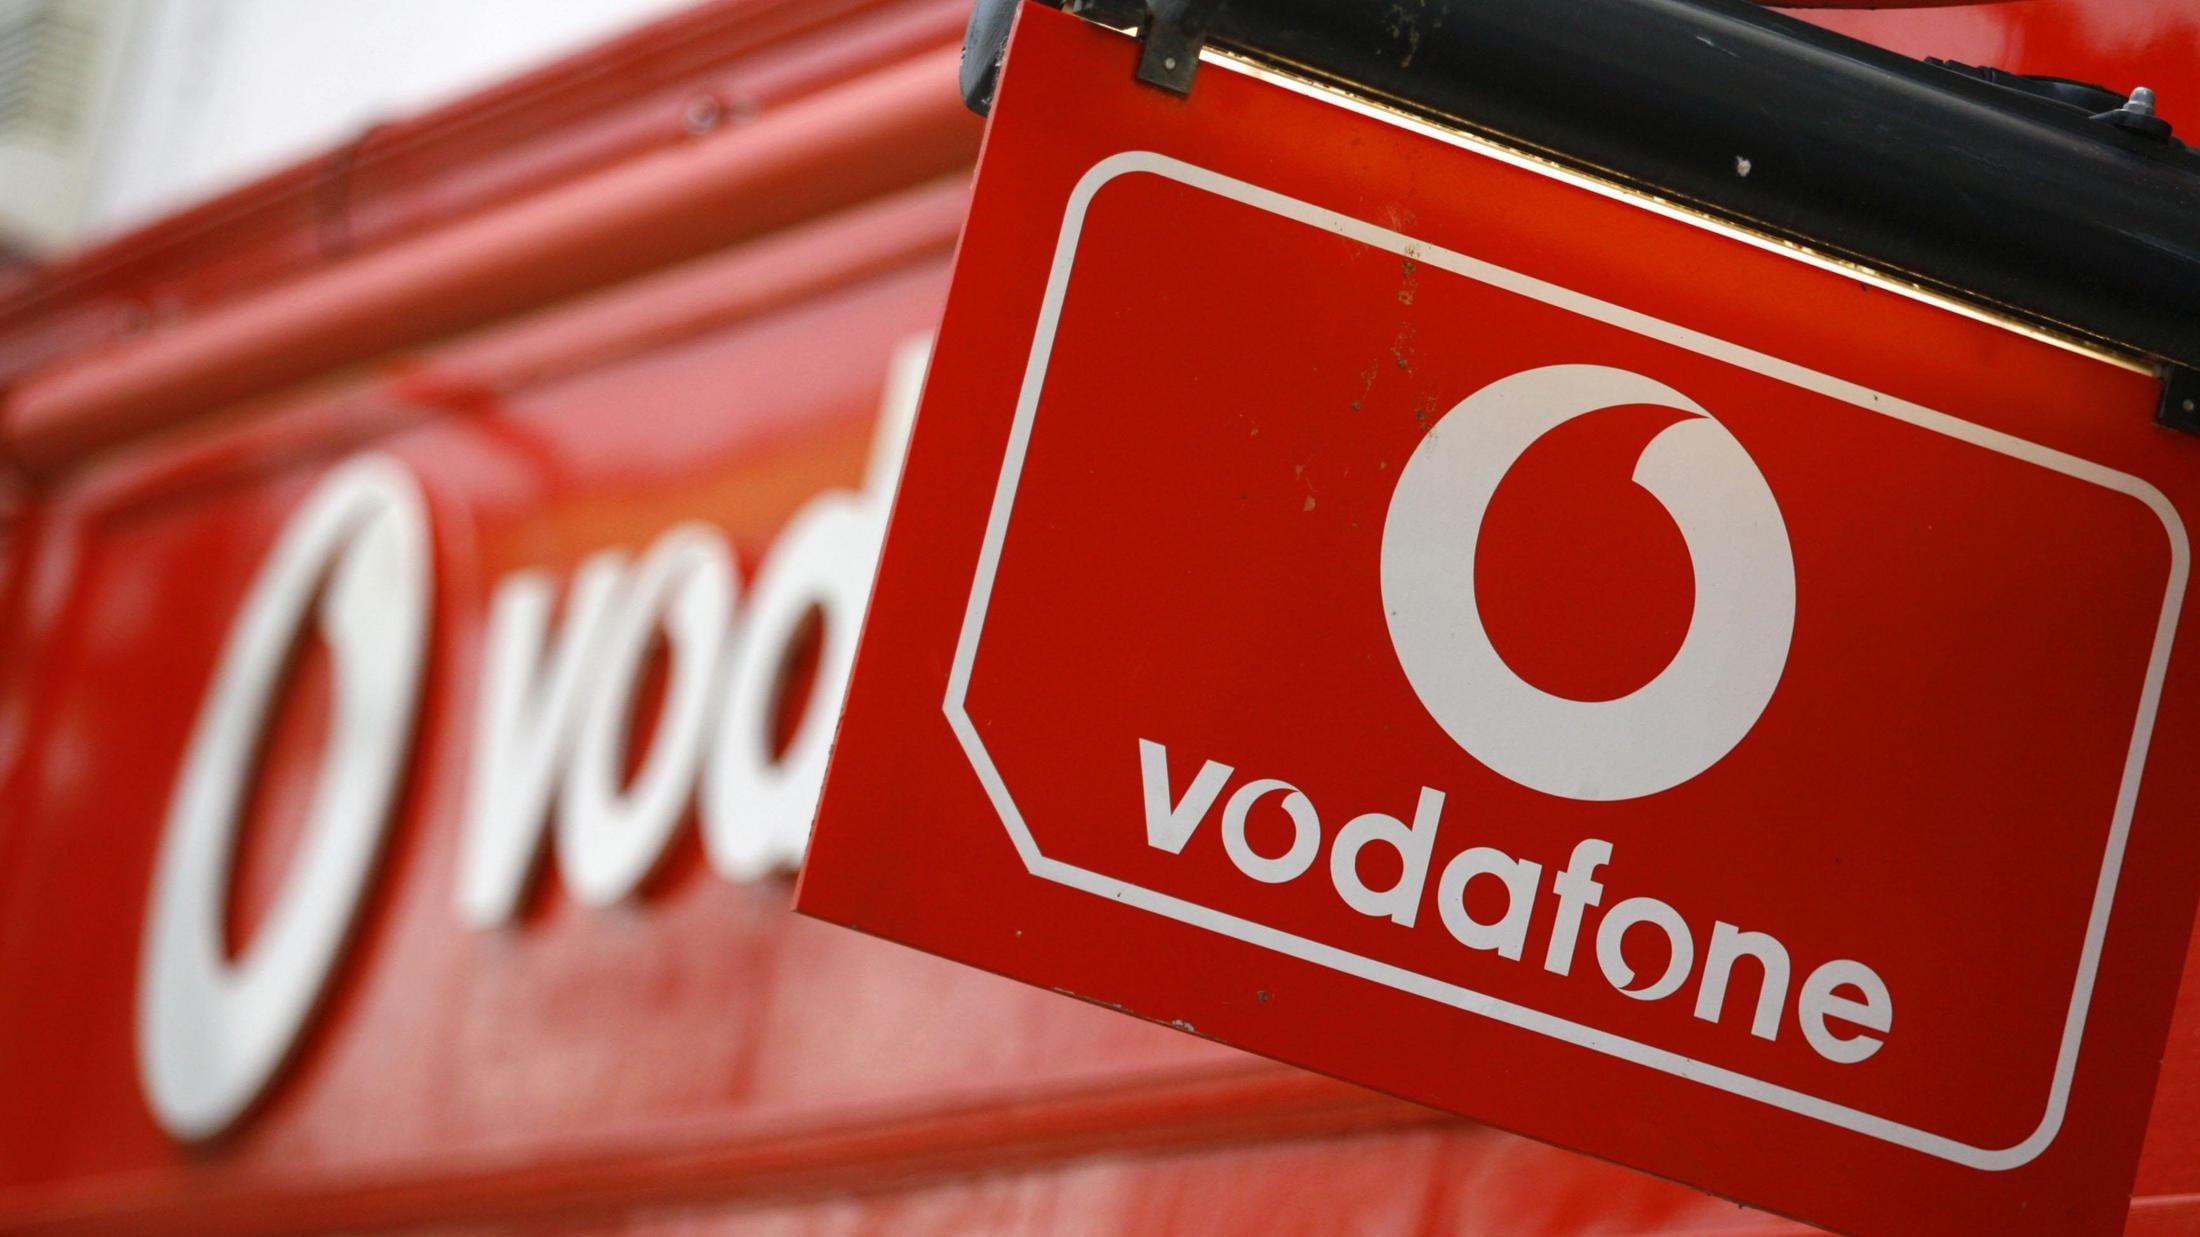 A final decision on a proposed merger between Vodafone and Three is currently being considered by the Competition and Markets Authority